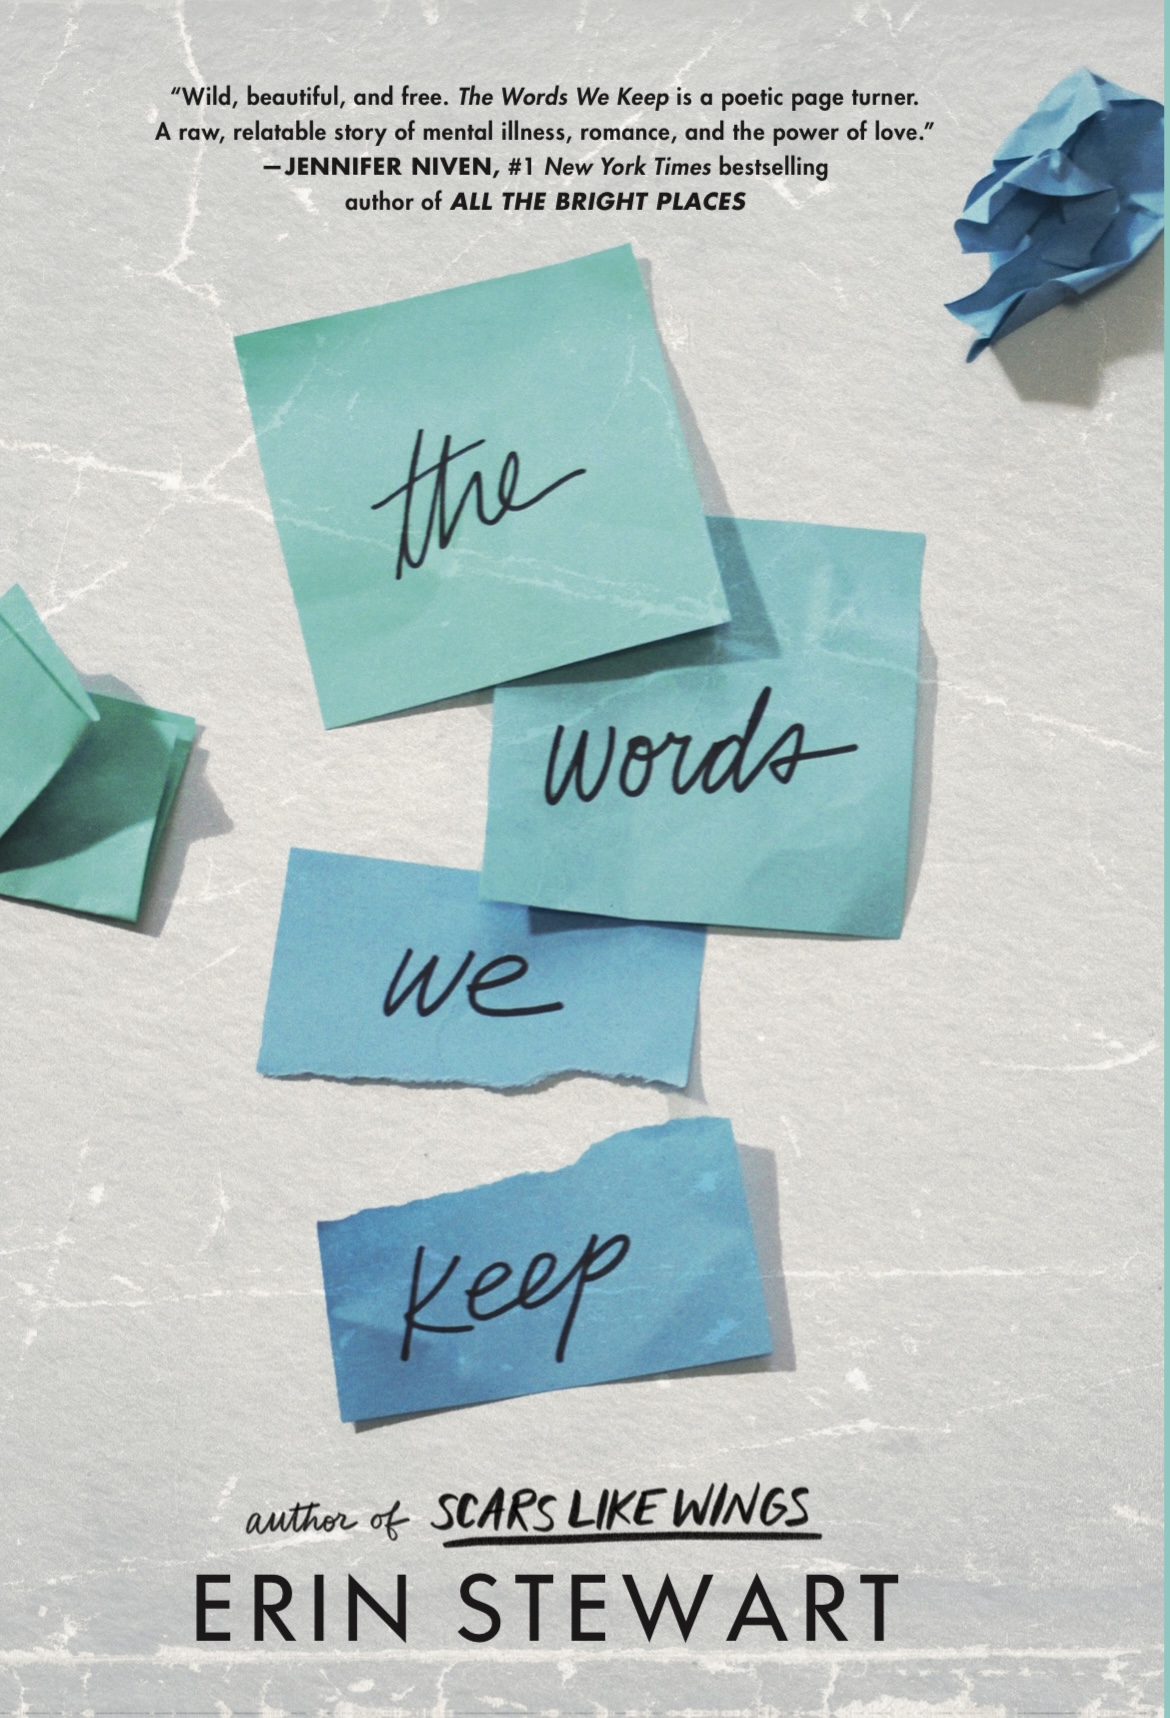 Book cover, sticky notes with the text "the words we keep"